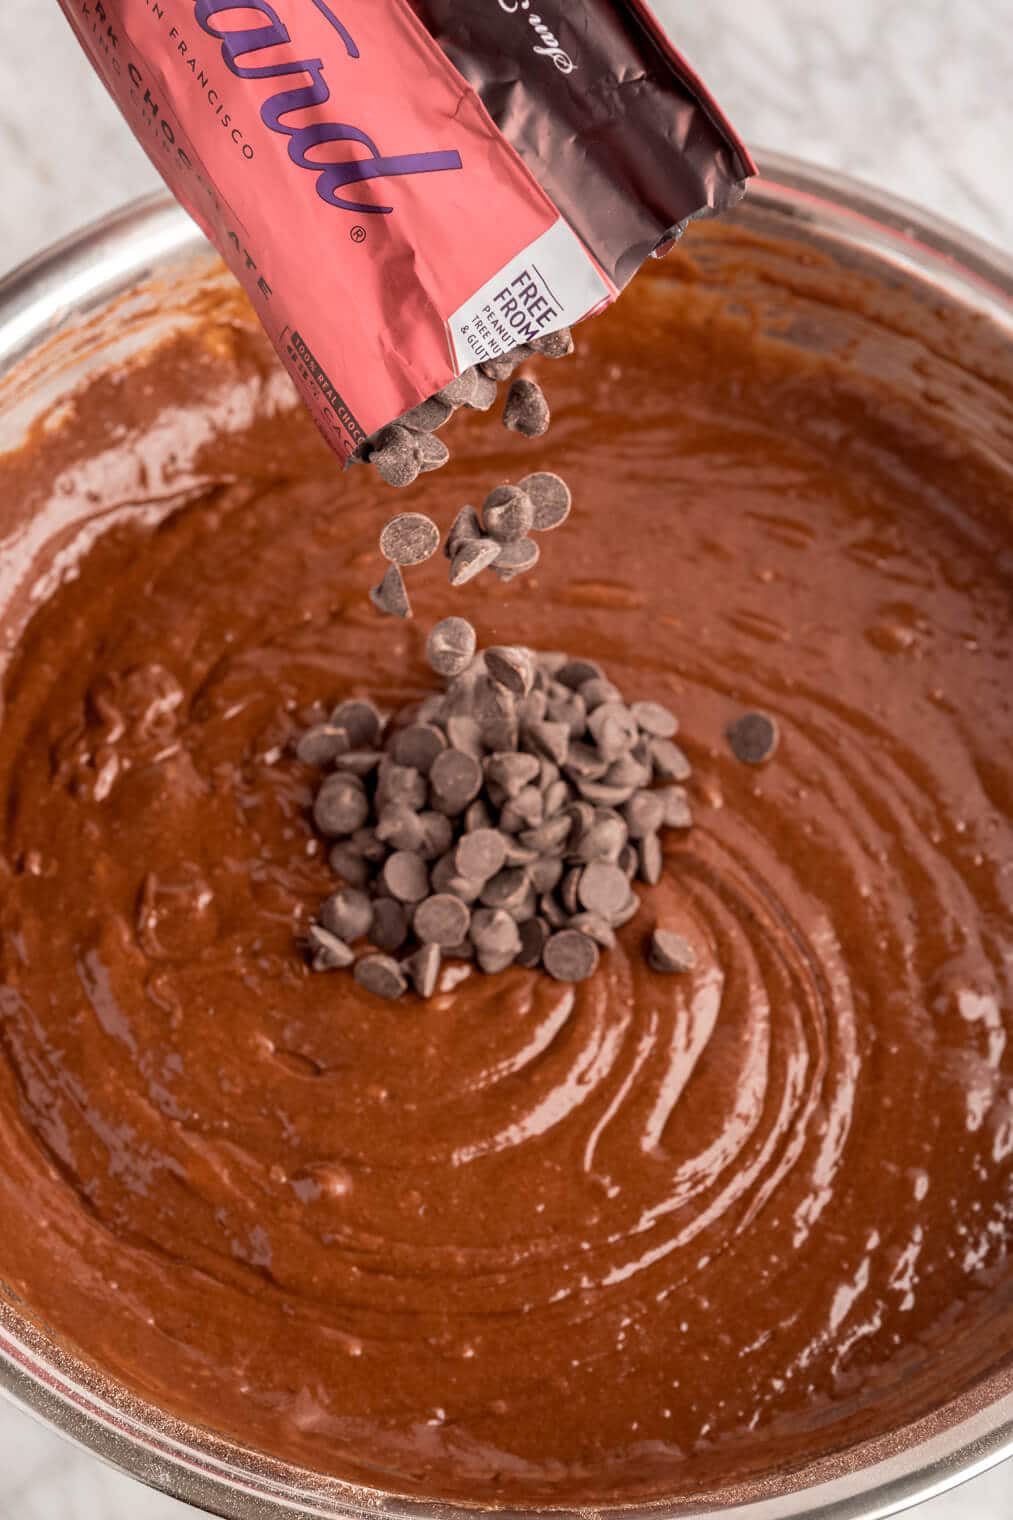 Chocolate chips being poured into chocolate cake batter.